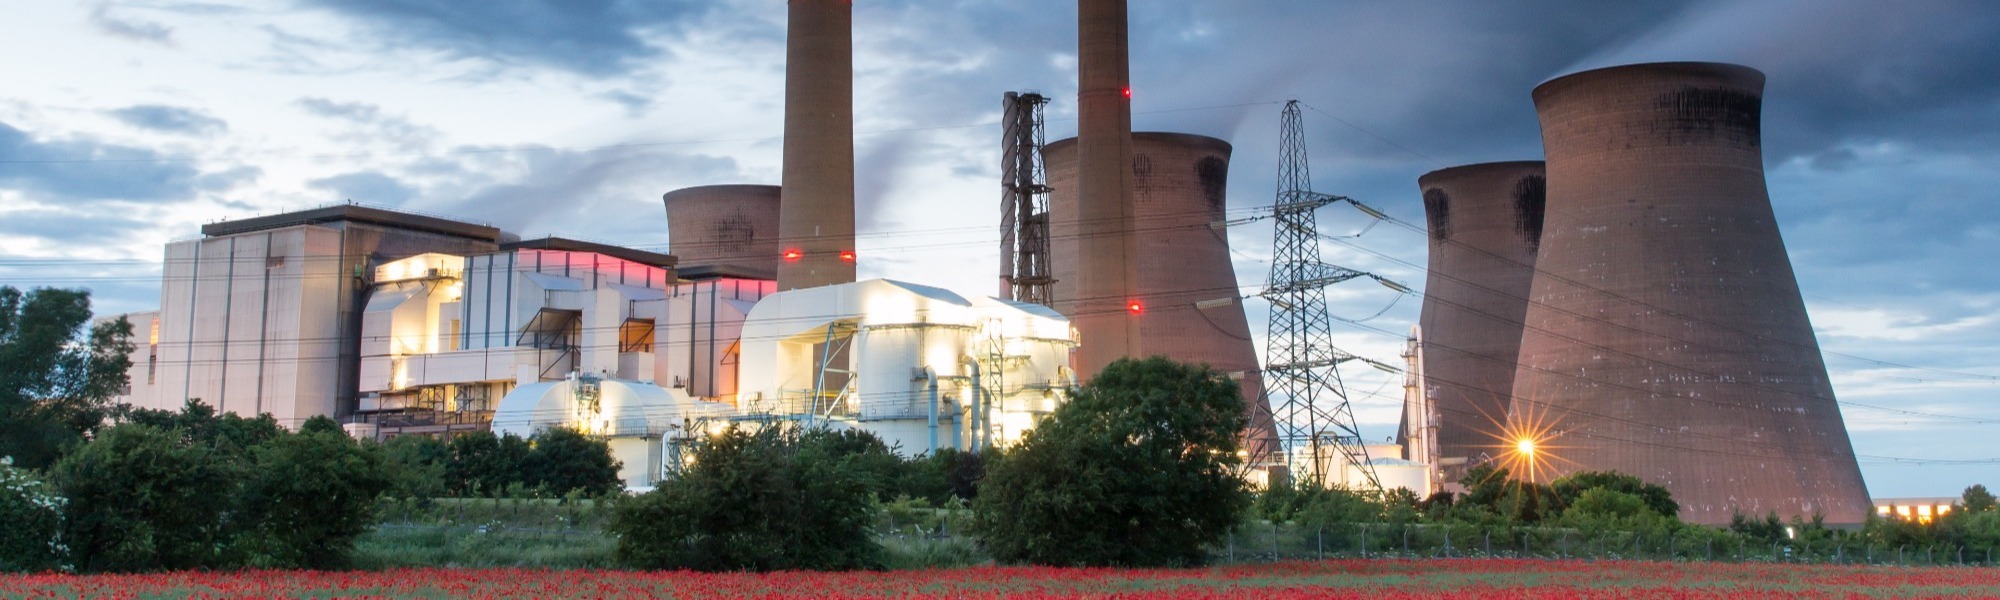 Image of a power station at dusk